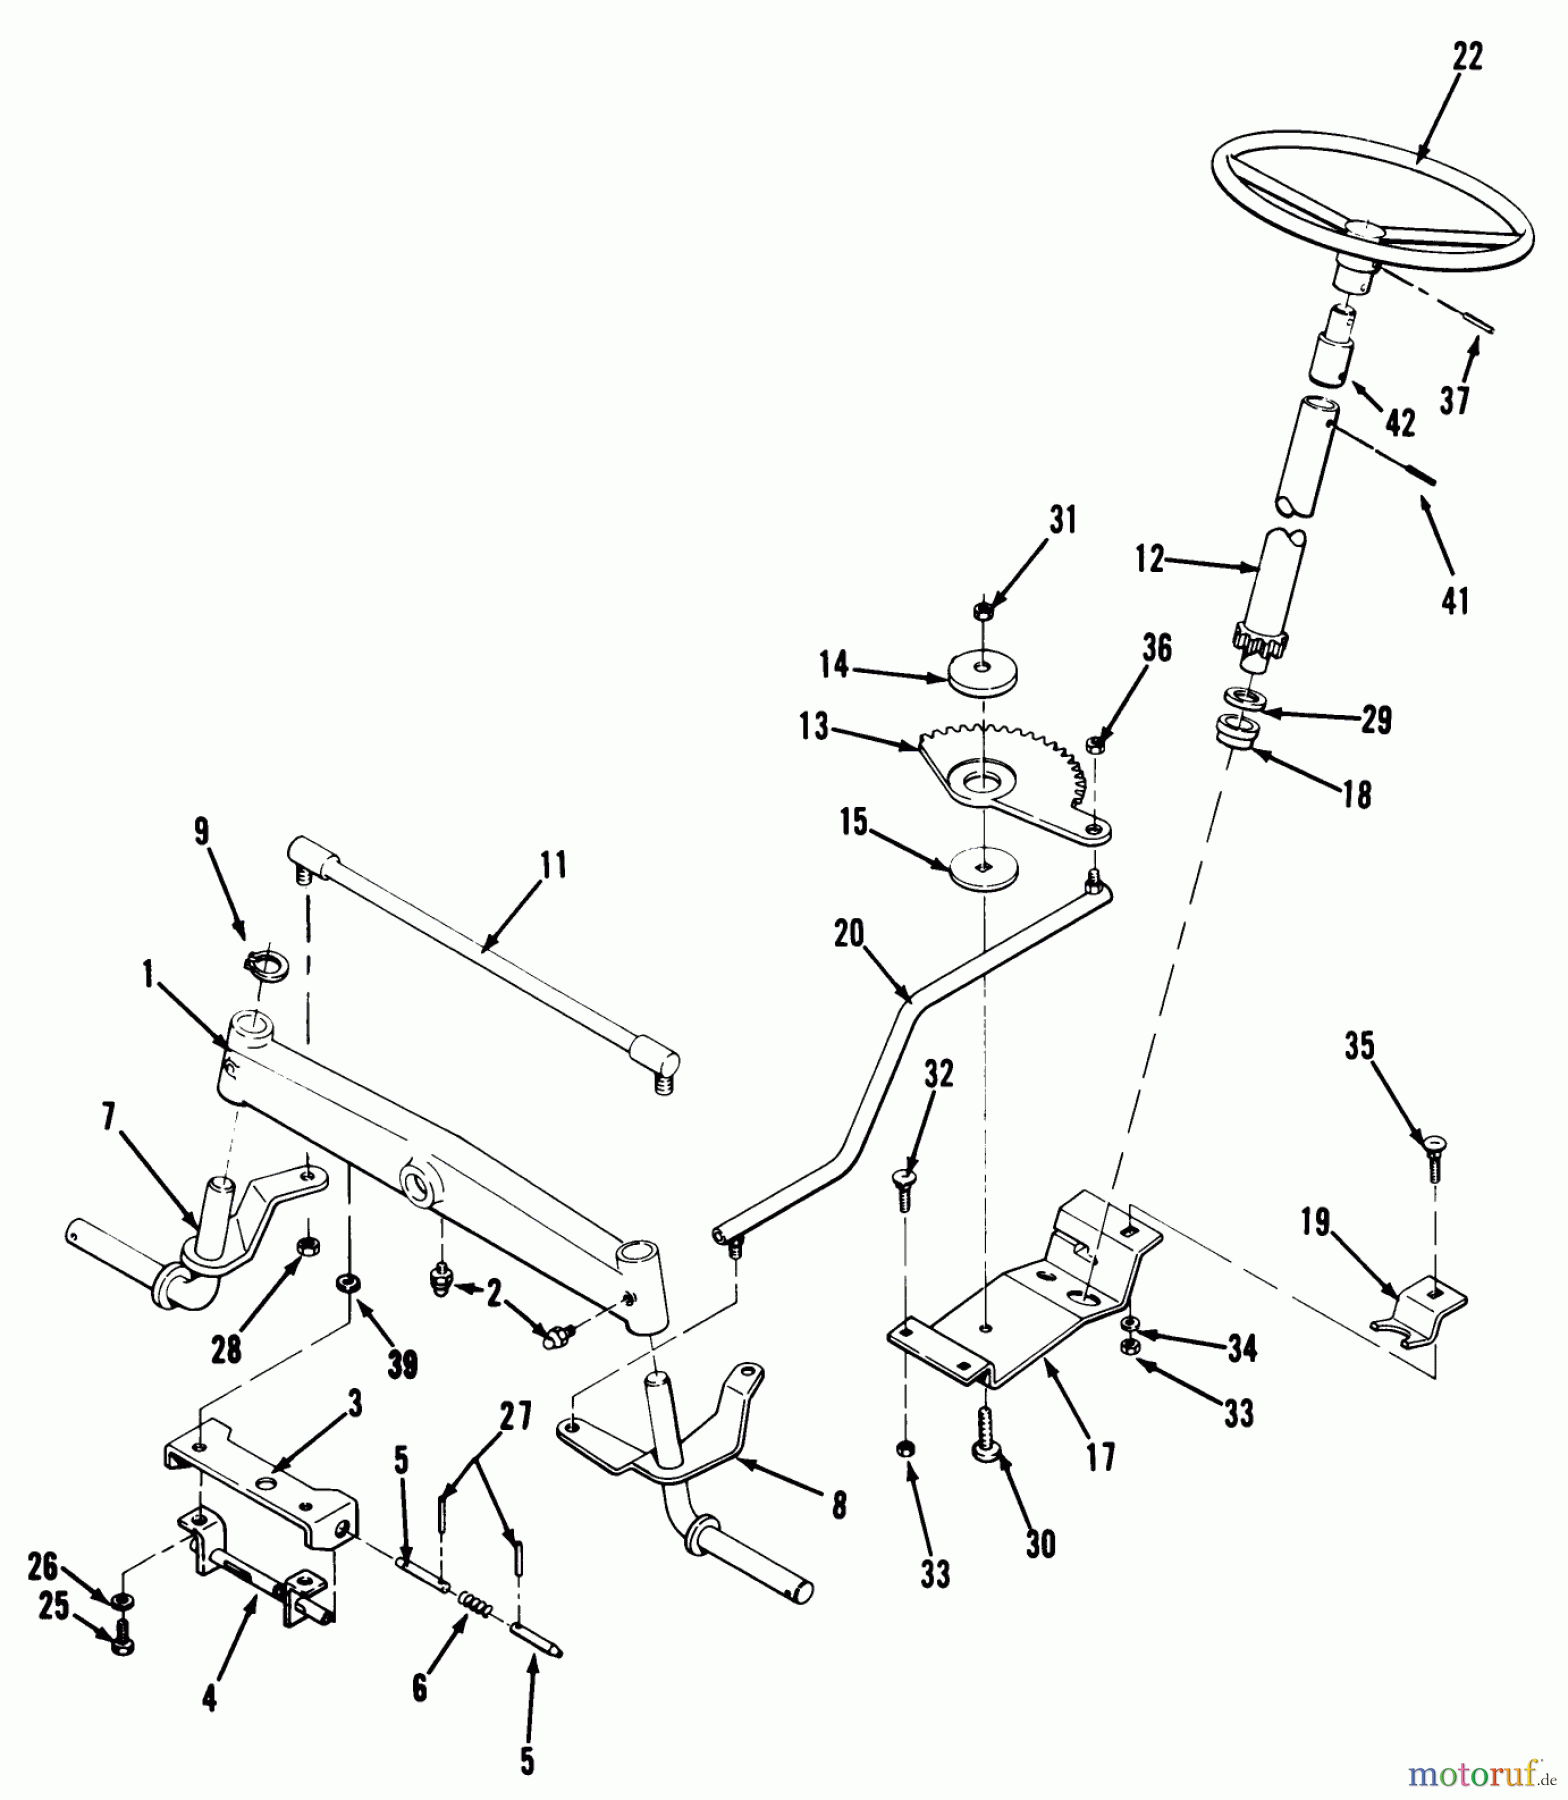  Toro Neu Mowers, Lawn & Garden Tractor Seite 2 A2-12K501 (212-5) - Toro 212-5 Tractor, 1991 (1000001-1999999) FRONT AXLE & STEERING ASSEMBLY